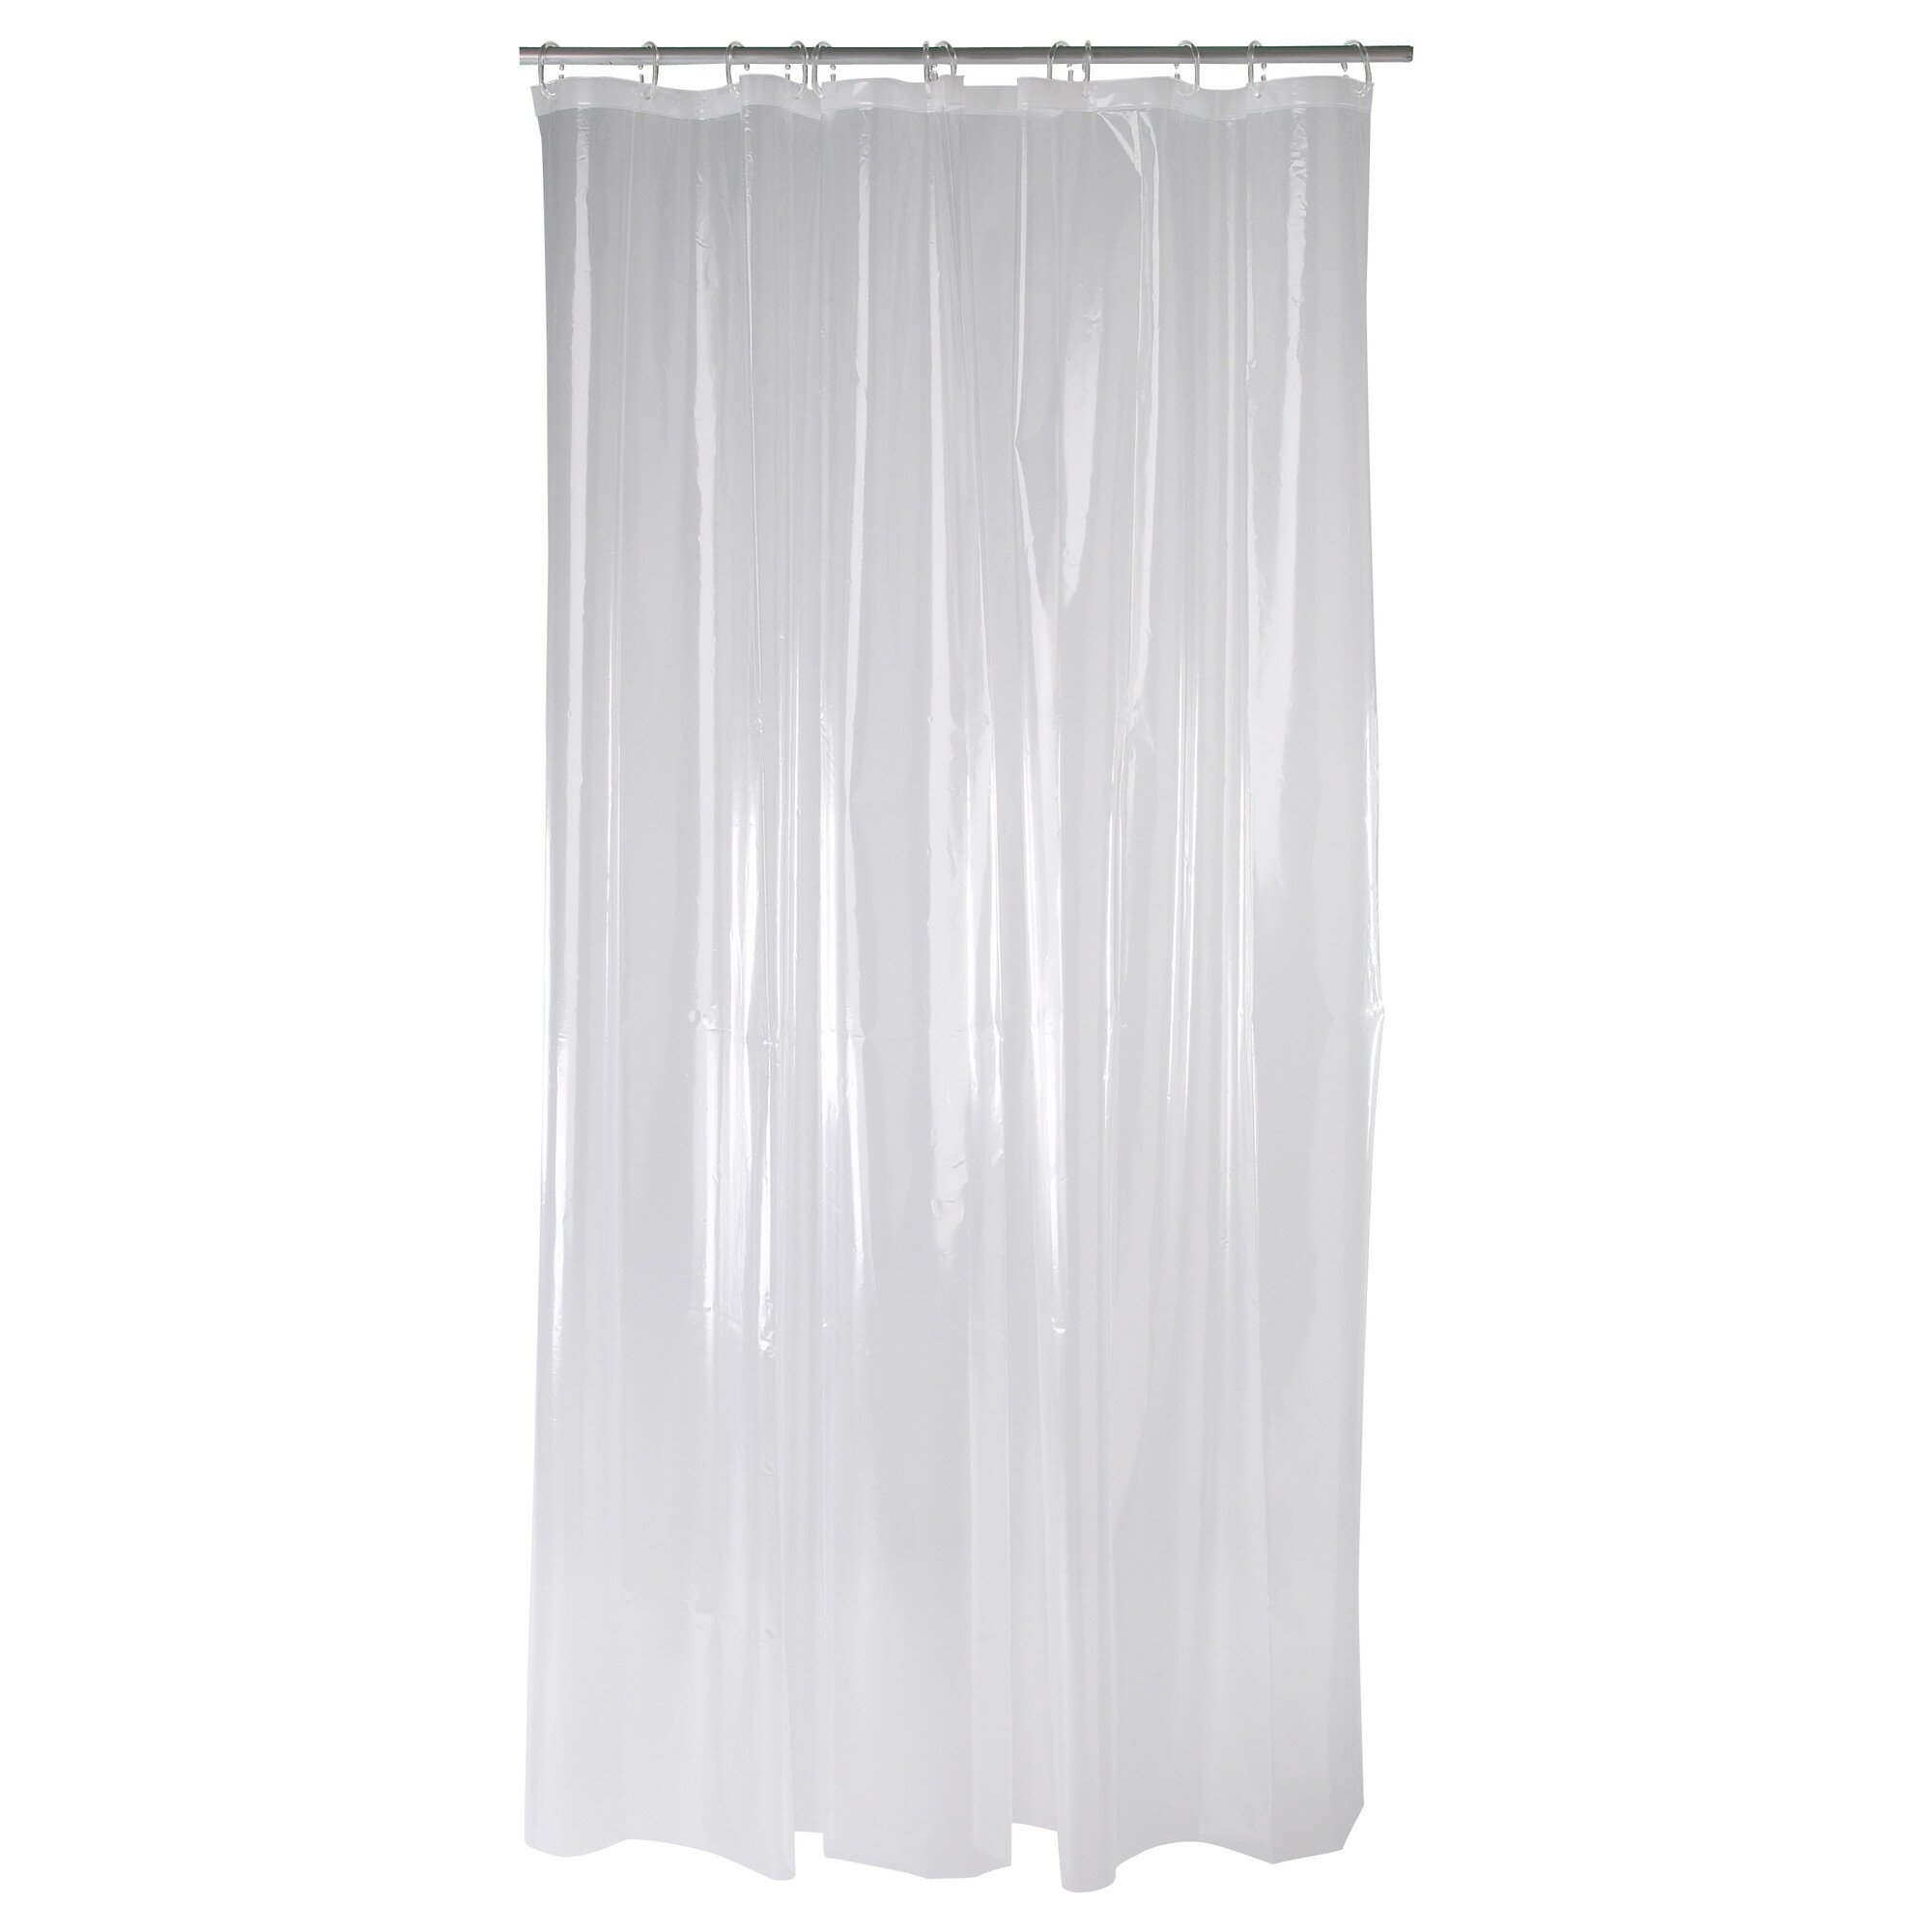 Frosted Shower Curtain | Bathroom Curtain Rods | Ikea Shower Curtain